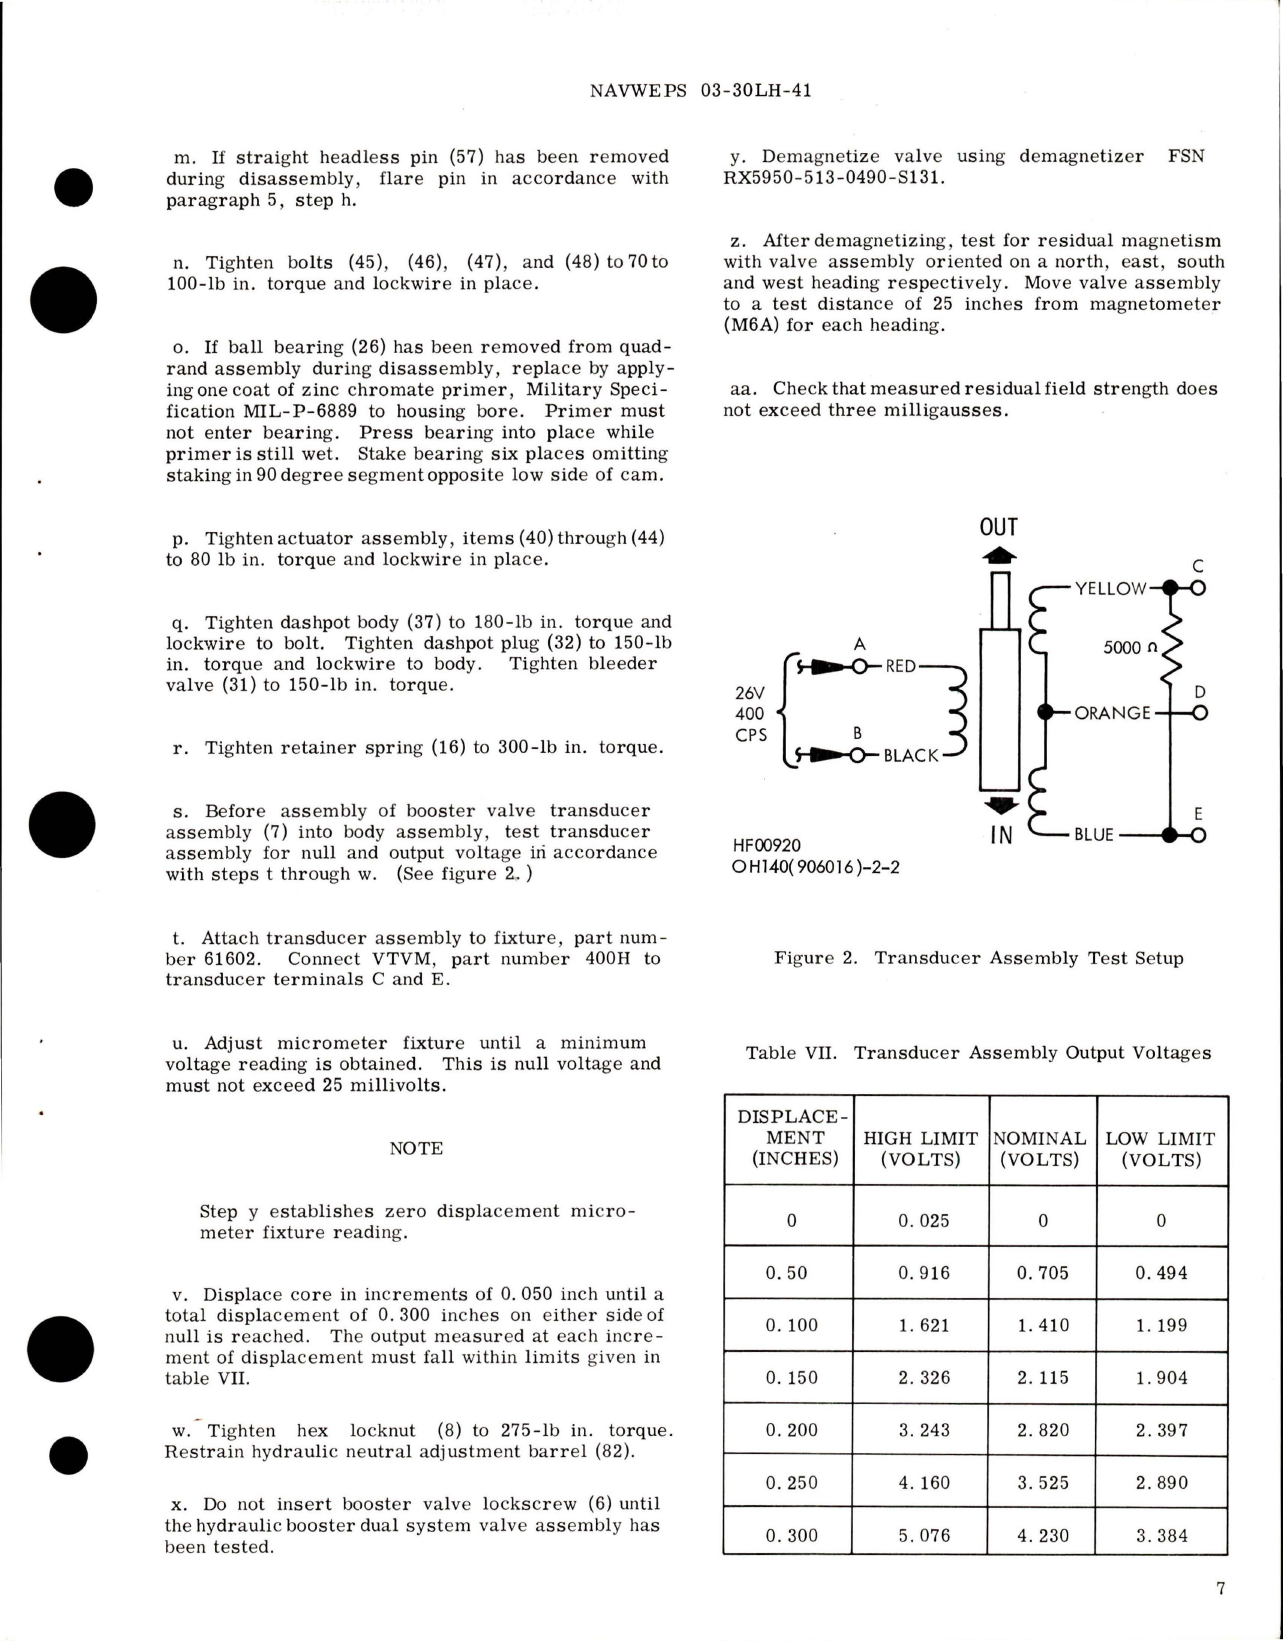 Sample page 9 from AirCorps Library document: Overhaul Instructions with Parts Breakdown for Hydraulic Booster Dual System Valve Assembly - Part 906016-101 